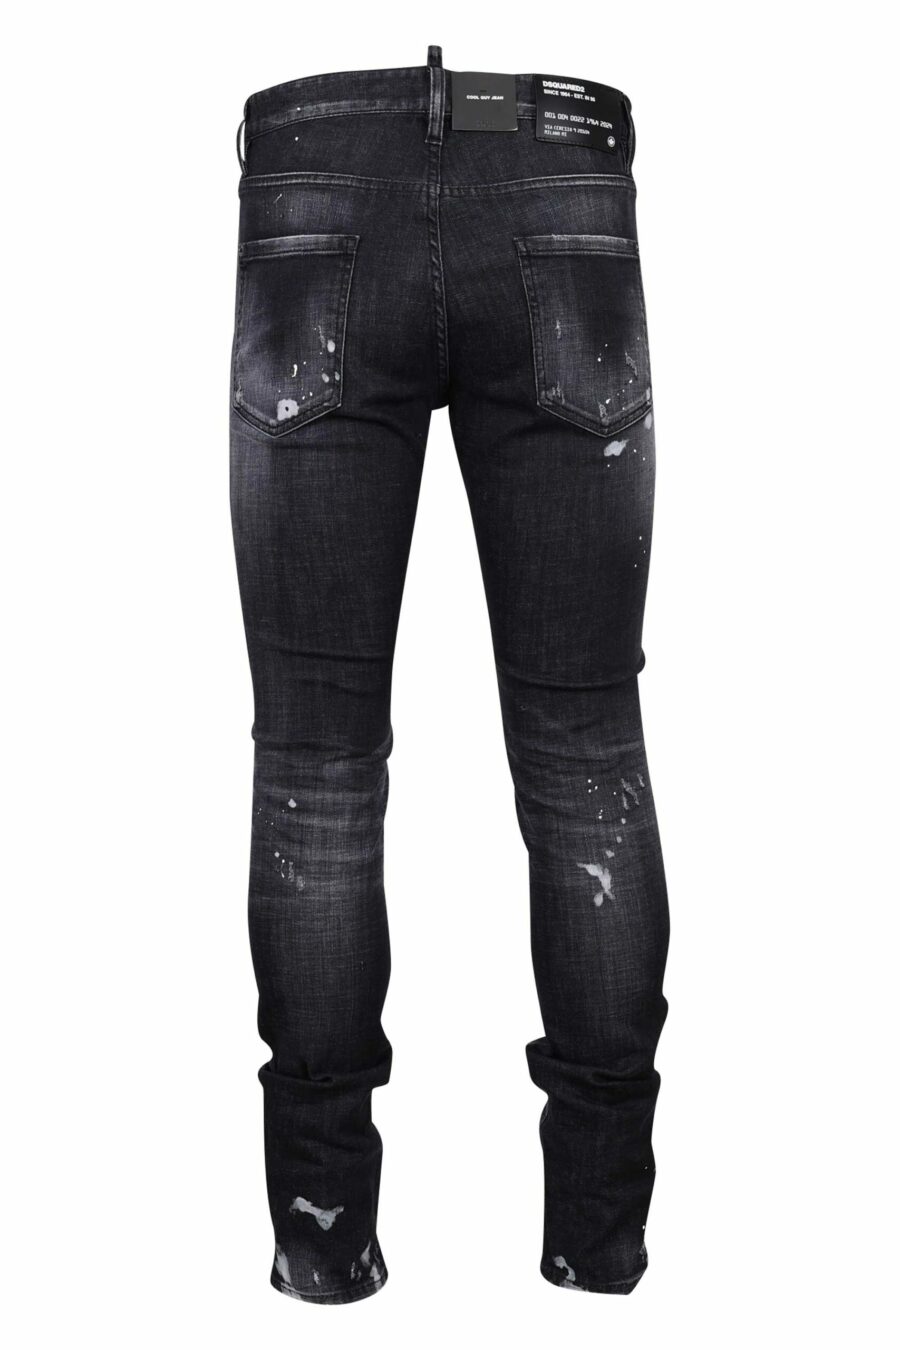 Black "cool guy jean" jeans with rips and frayed - 8054148300753 2 scaled